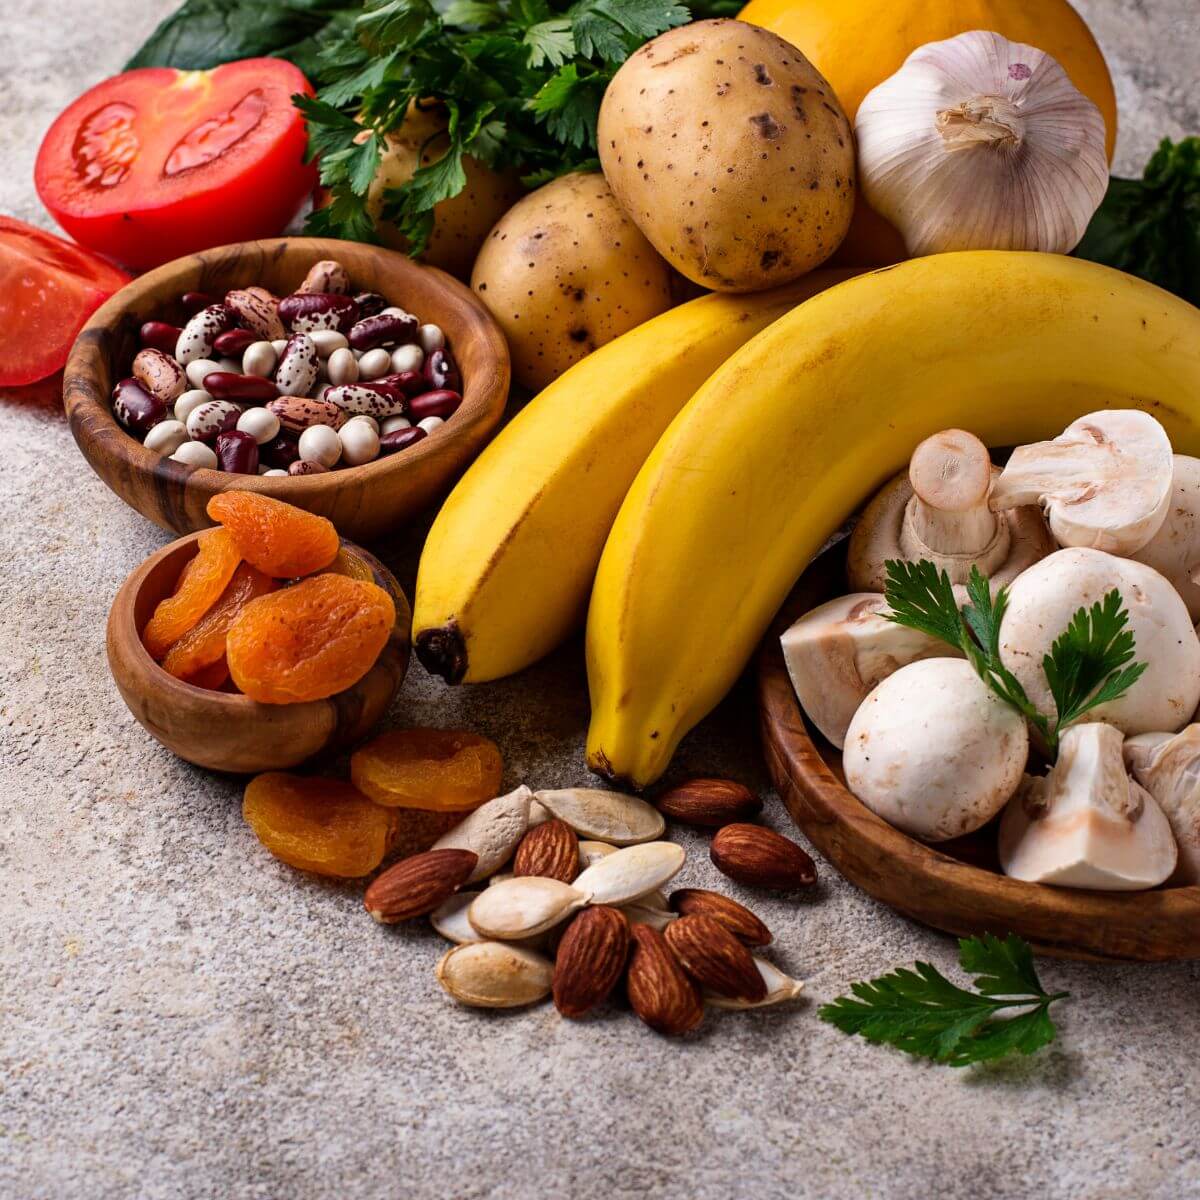 What is Your Favorite Vitamin & Mineral Rich Food?